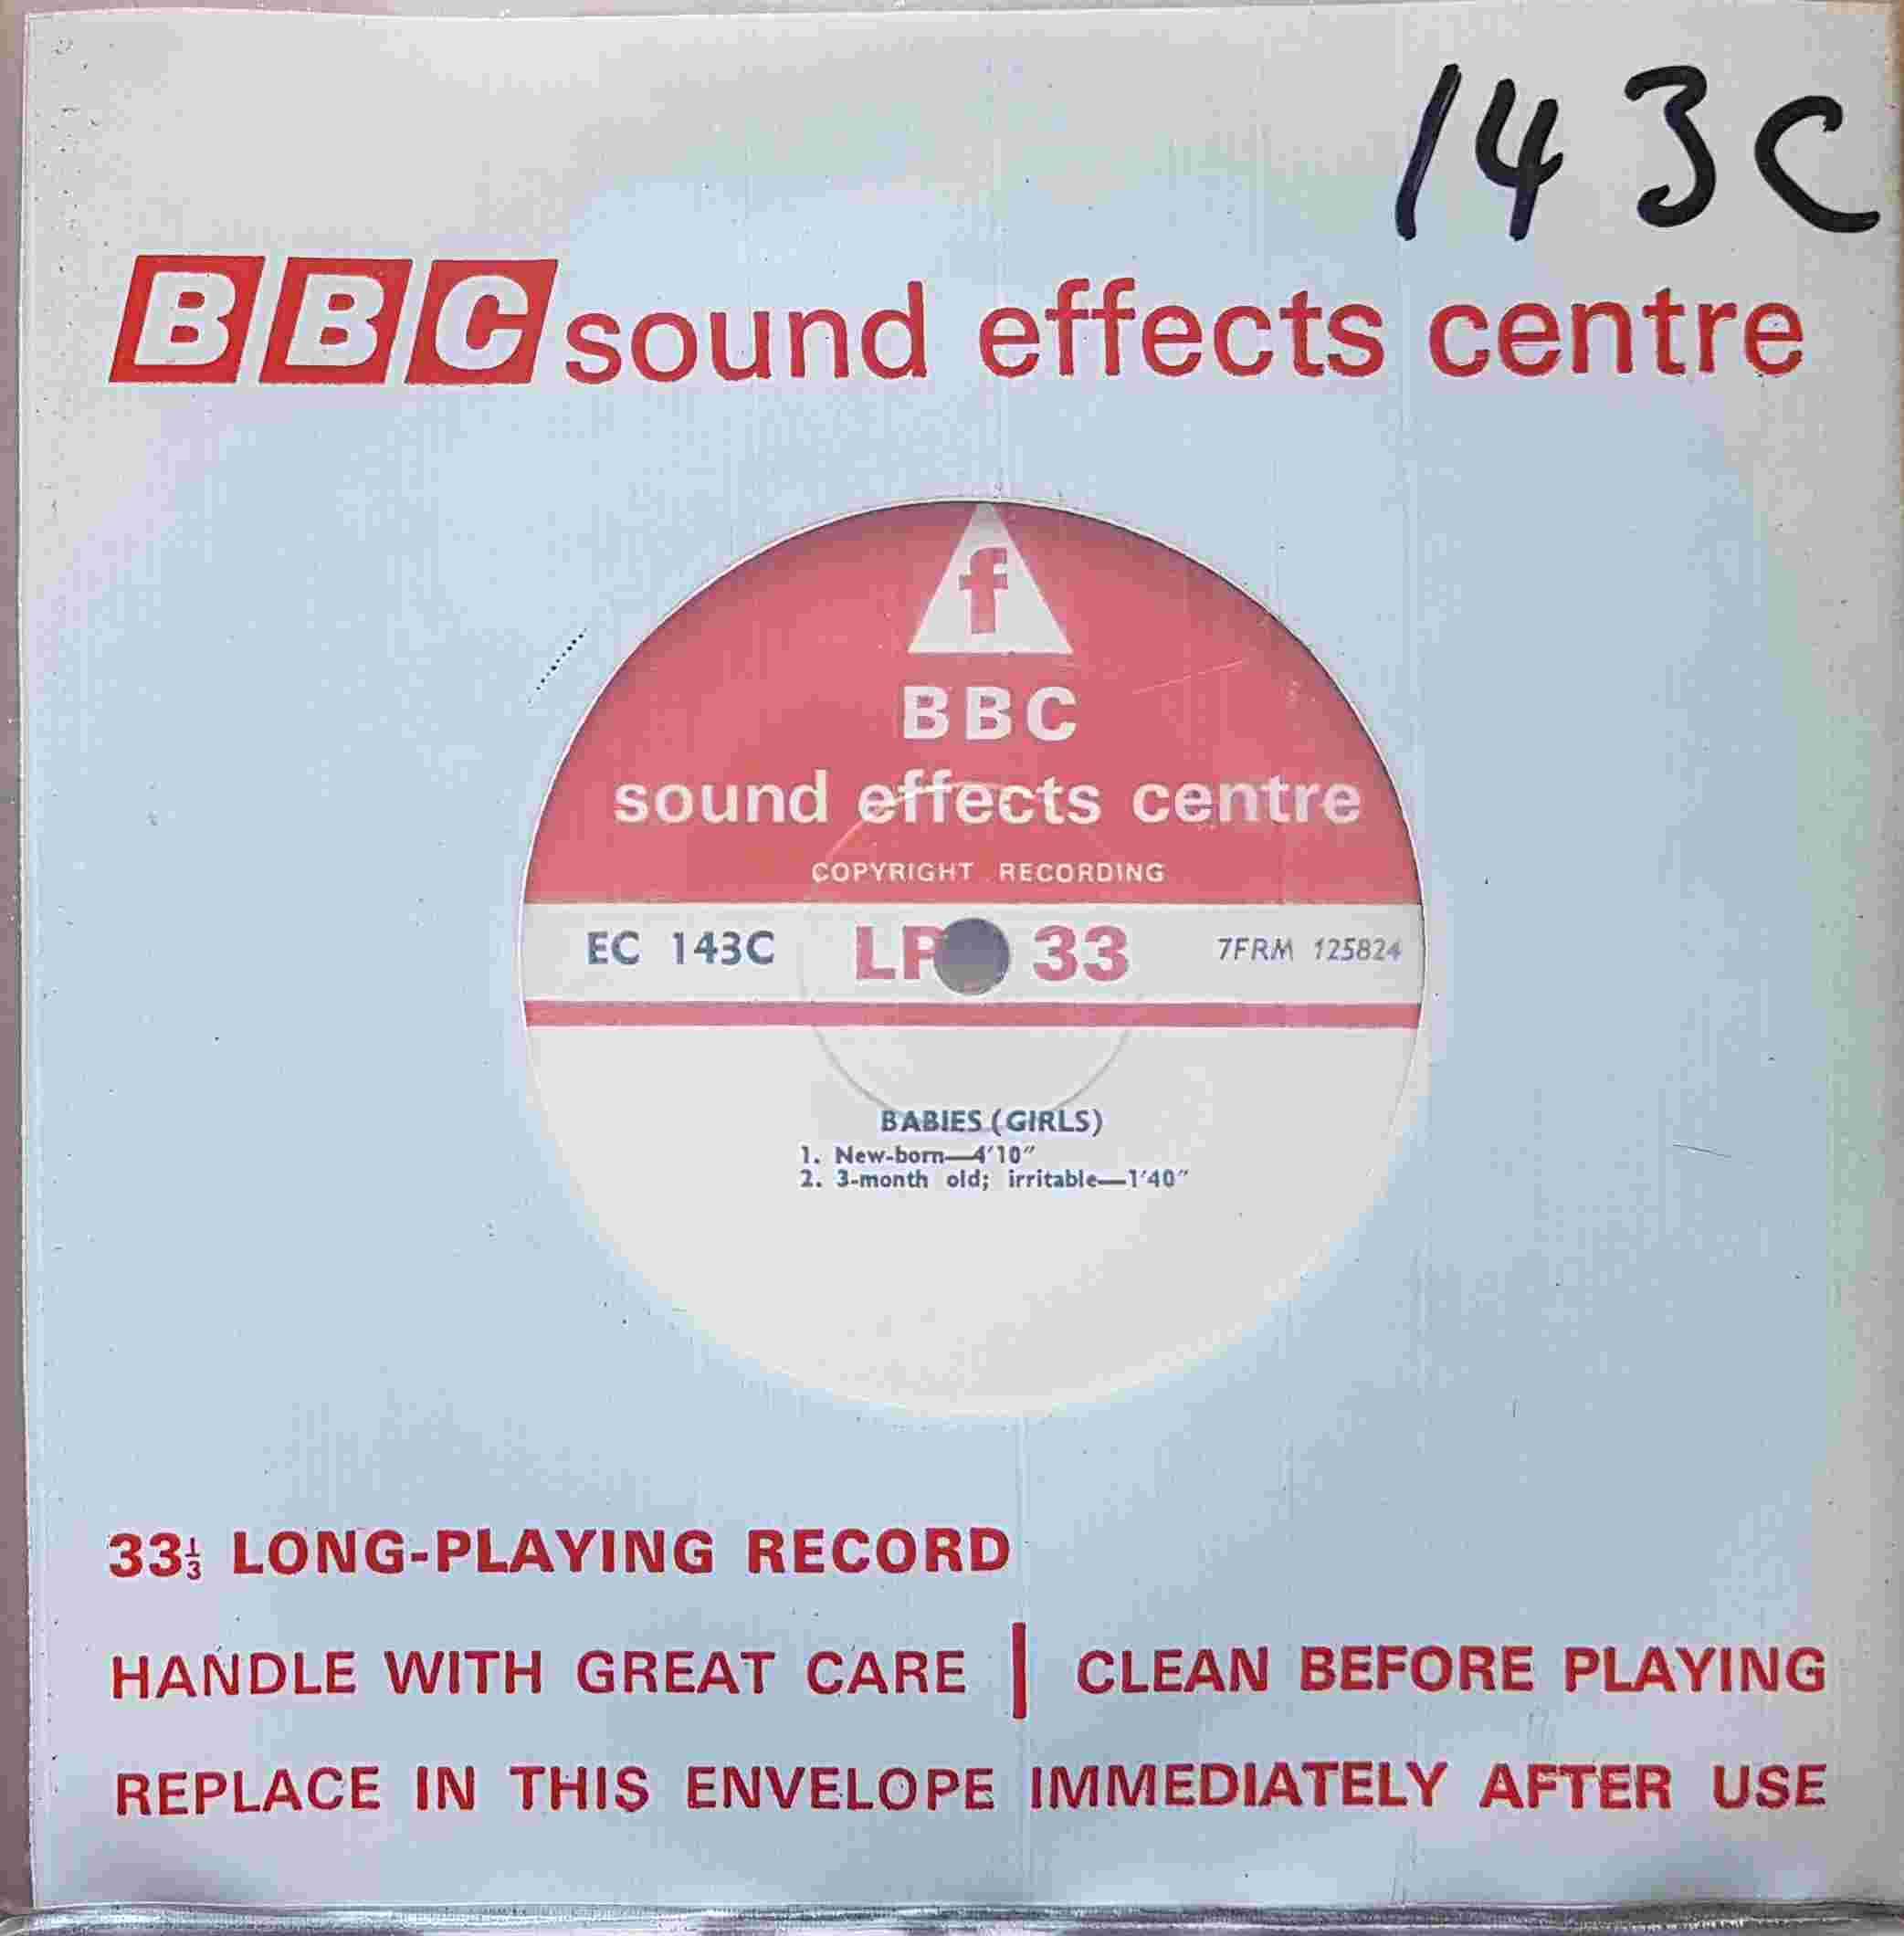 Picture of EC 143C Babies (Girls) by artist Not registered from the BBC singles - Records and Tapes library